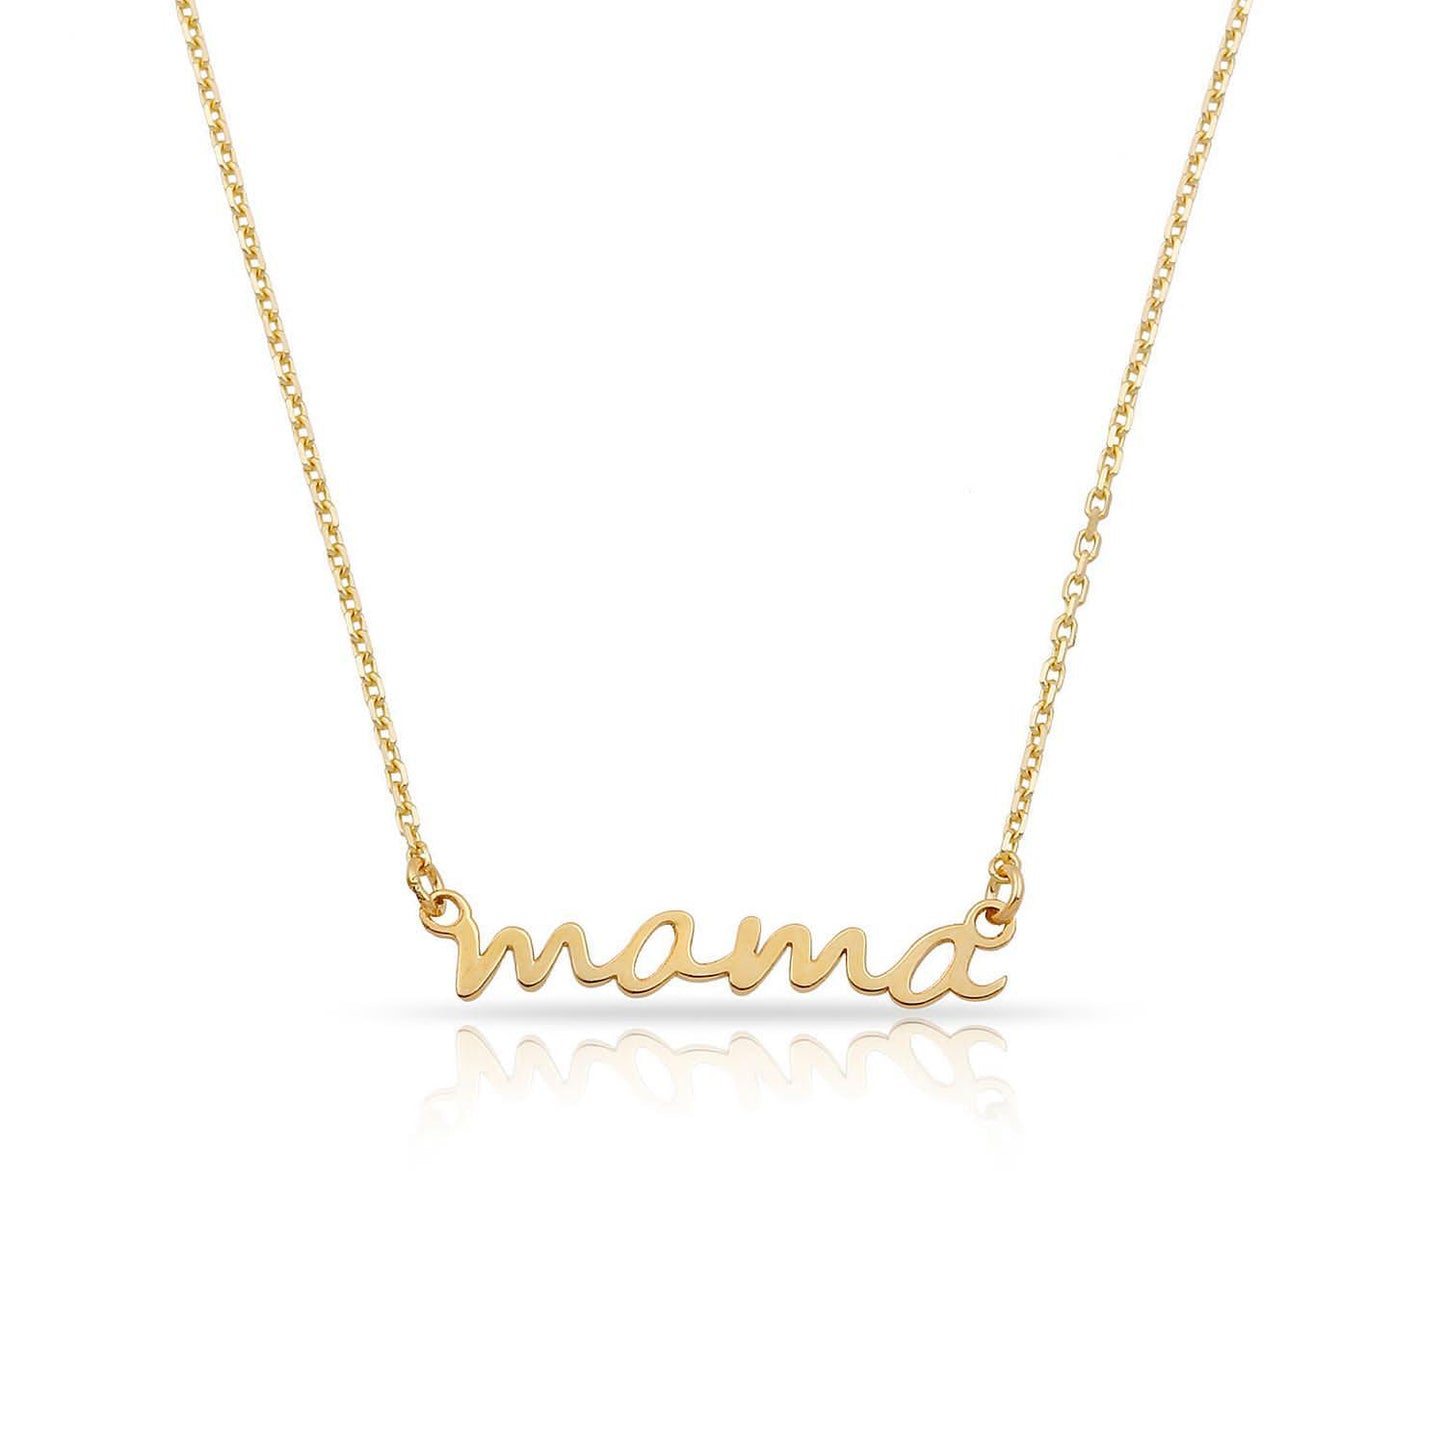 TSK 14k Gold Mama Script Necklace JEWELRY The Sis Kiss 14k Gold